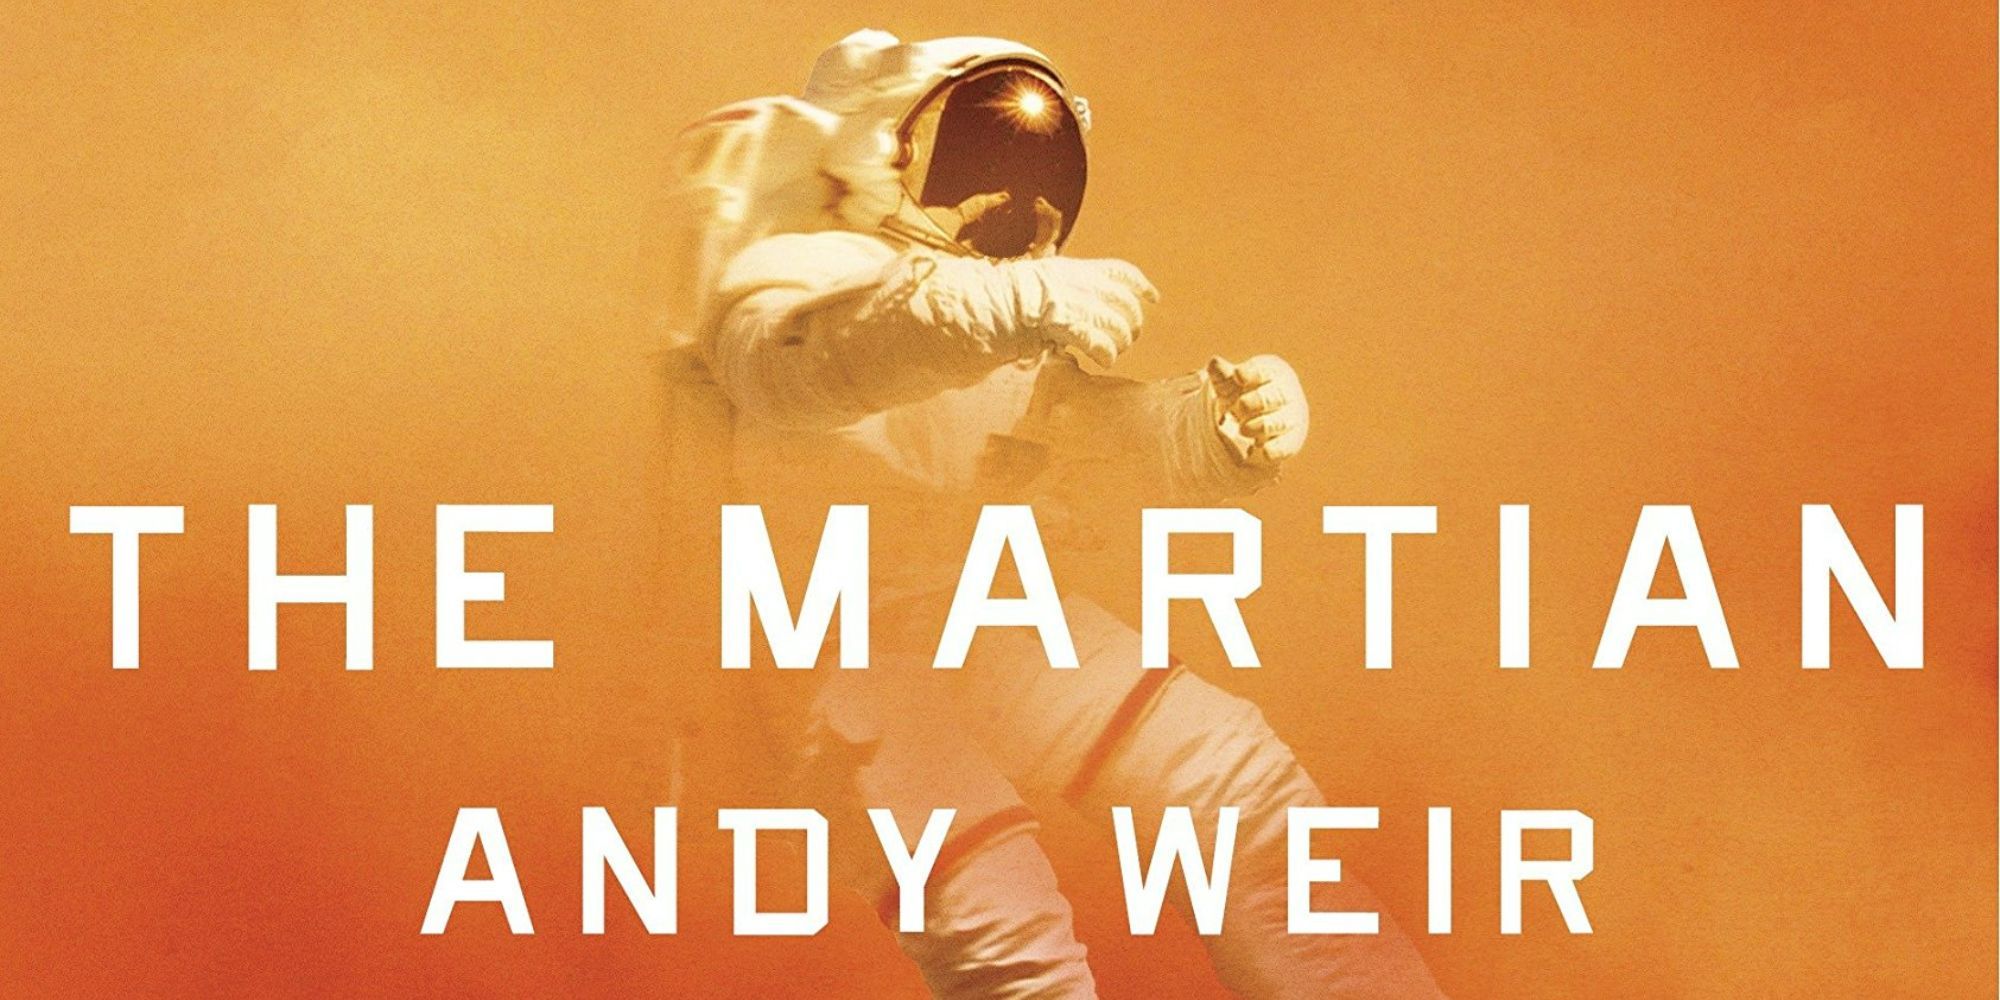 The cover of Andy Weir's novel The Martian